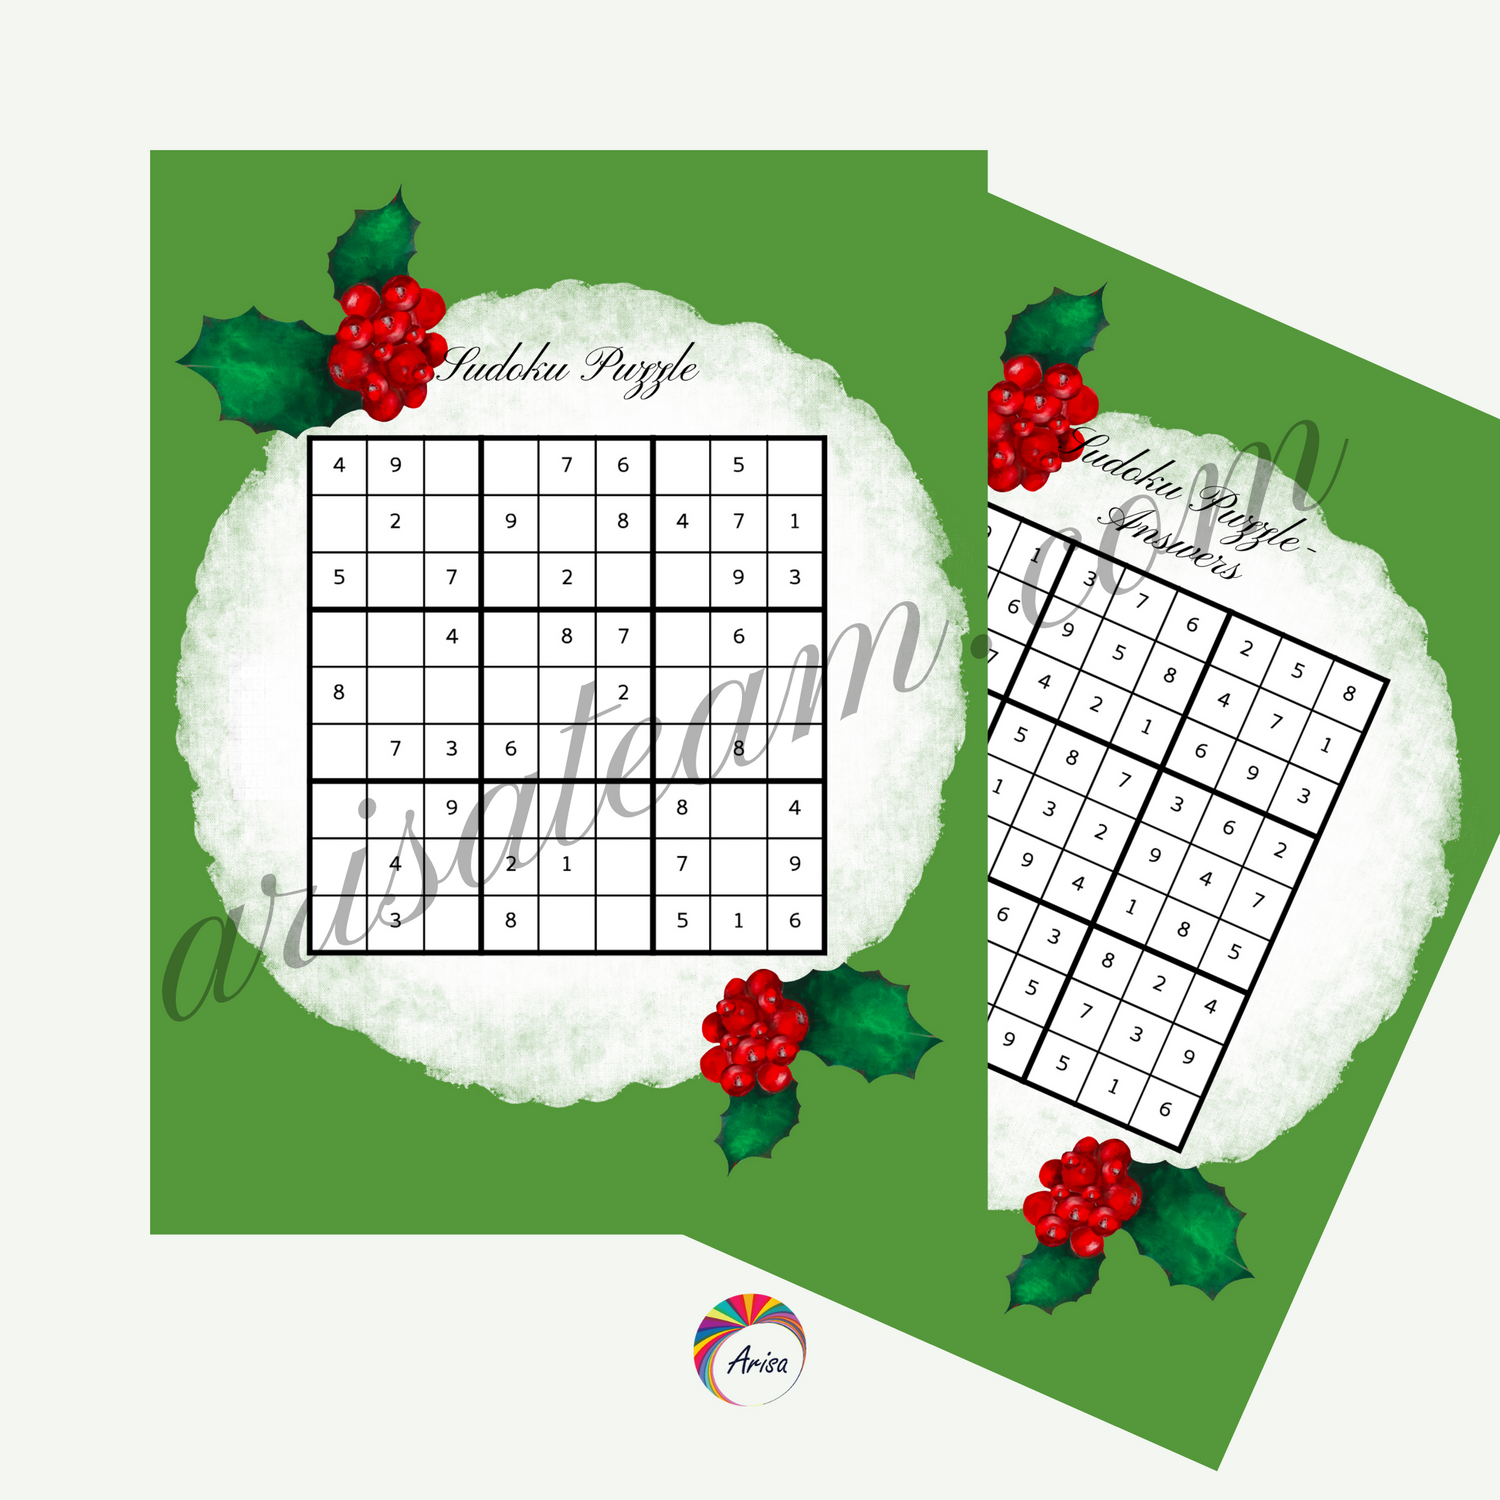 The sudoku puzzle and its answers of the "Christmas Charm Activity Pack" from ArisaTeam